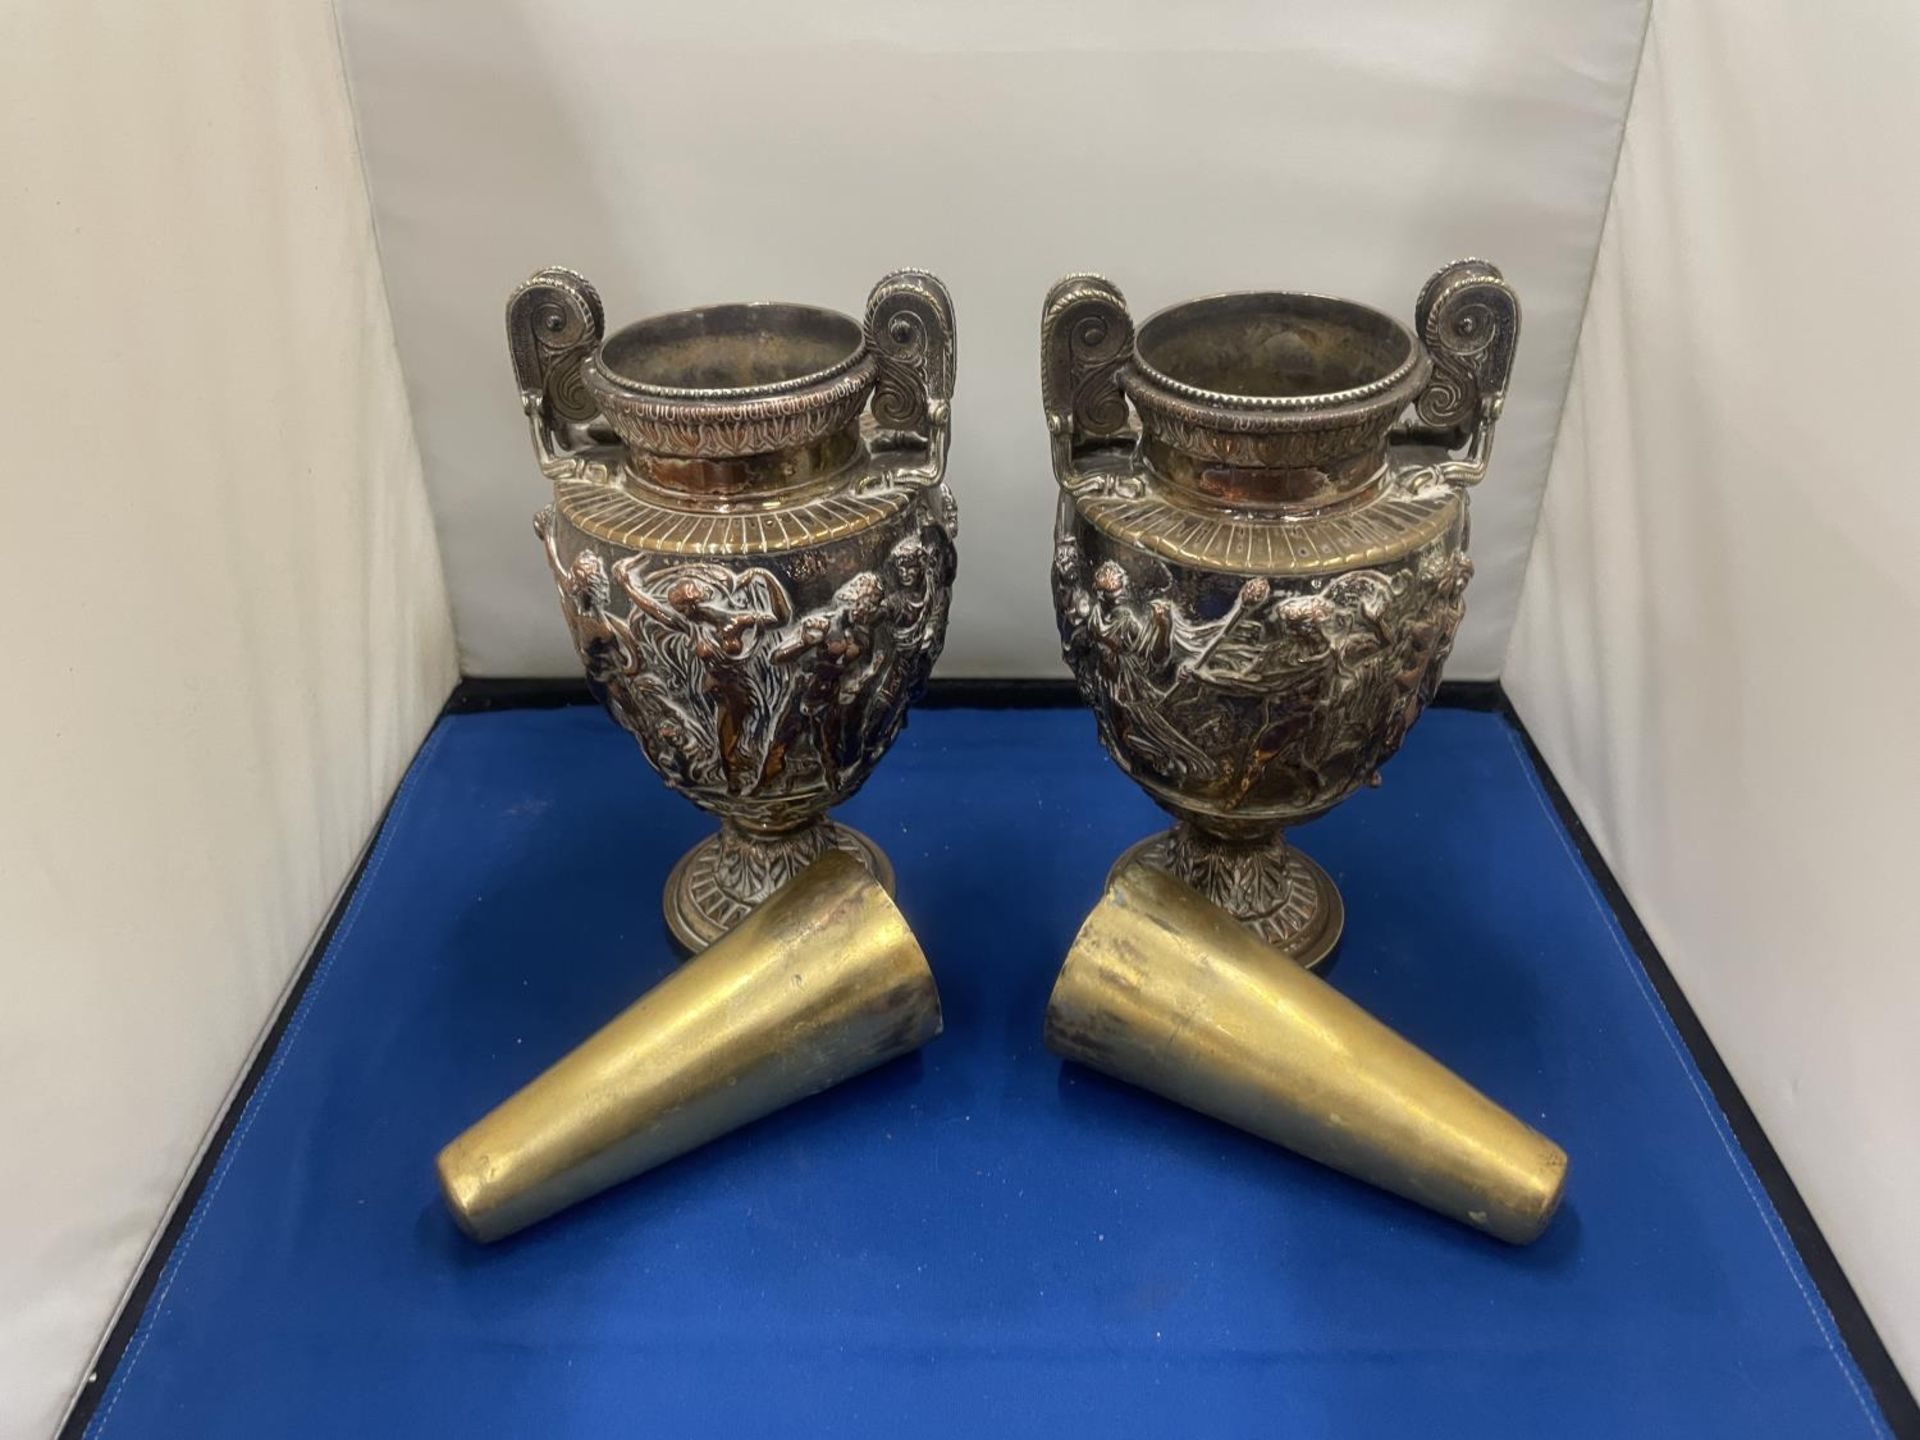 A PAIR OF DECORATIVE TWIN HANDLED URNS WITH INNER LINERS HEIGHT 18CM - Image 4 of 5